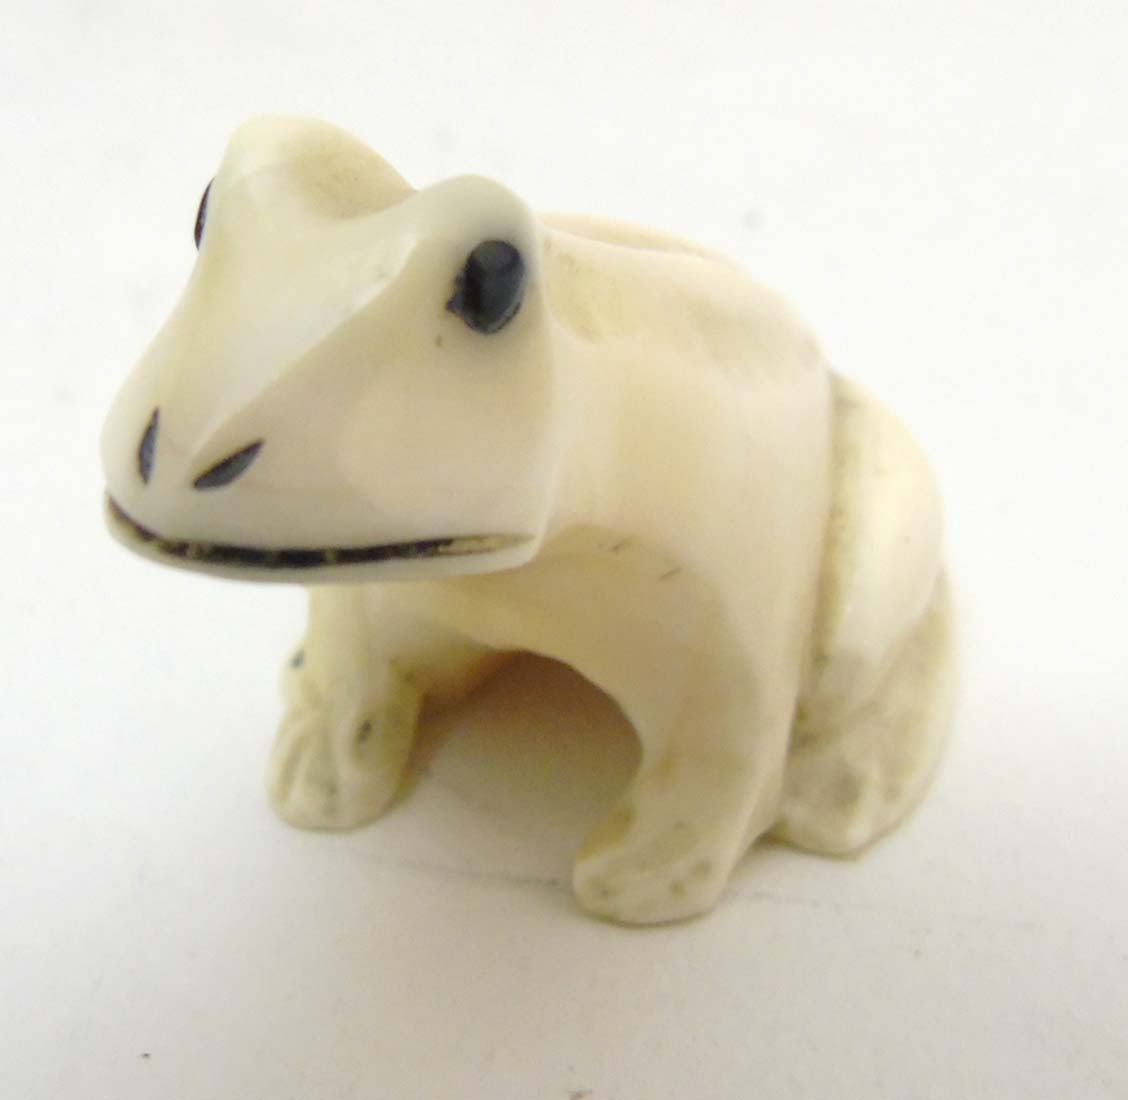 A Japanese Meiji period signed ivory netsuke formed as a frog with black eyes. - Image 4 of 8